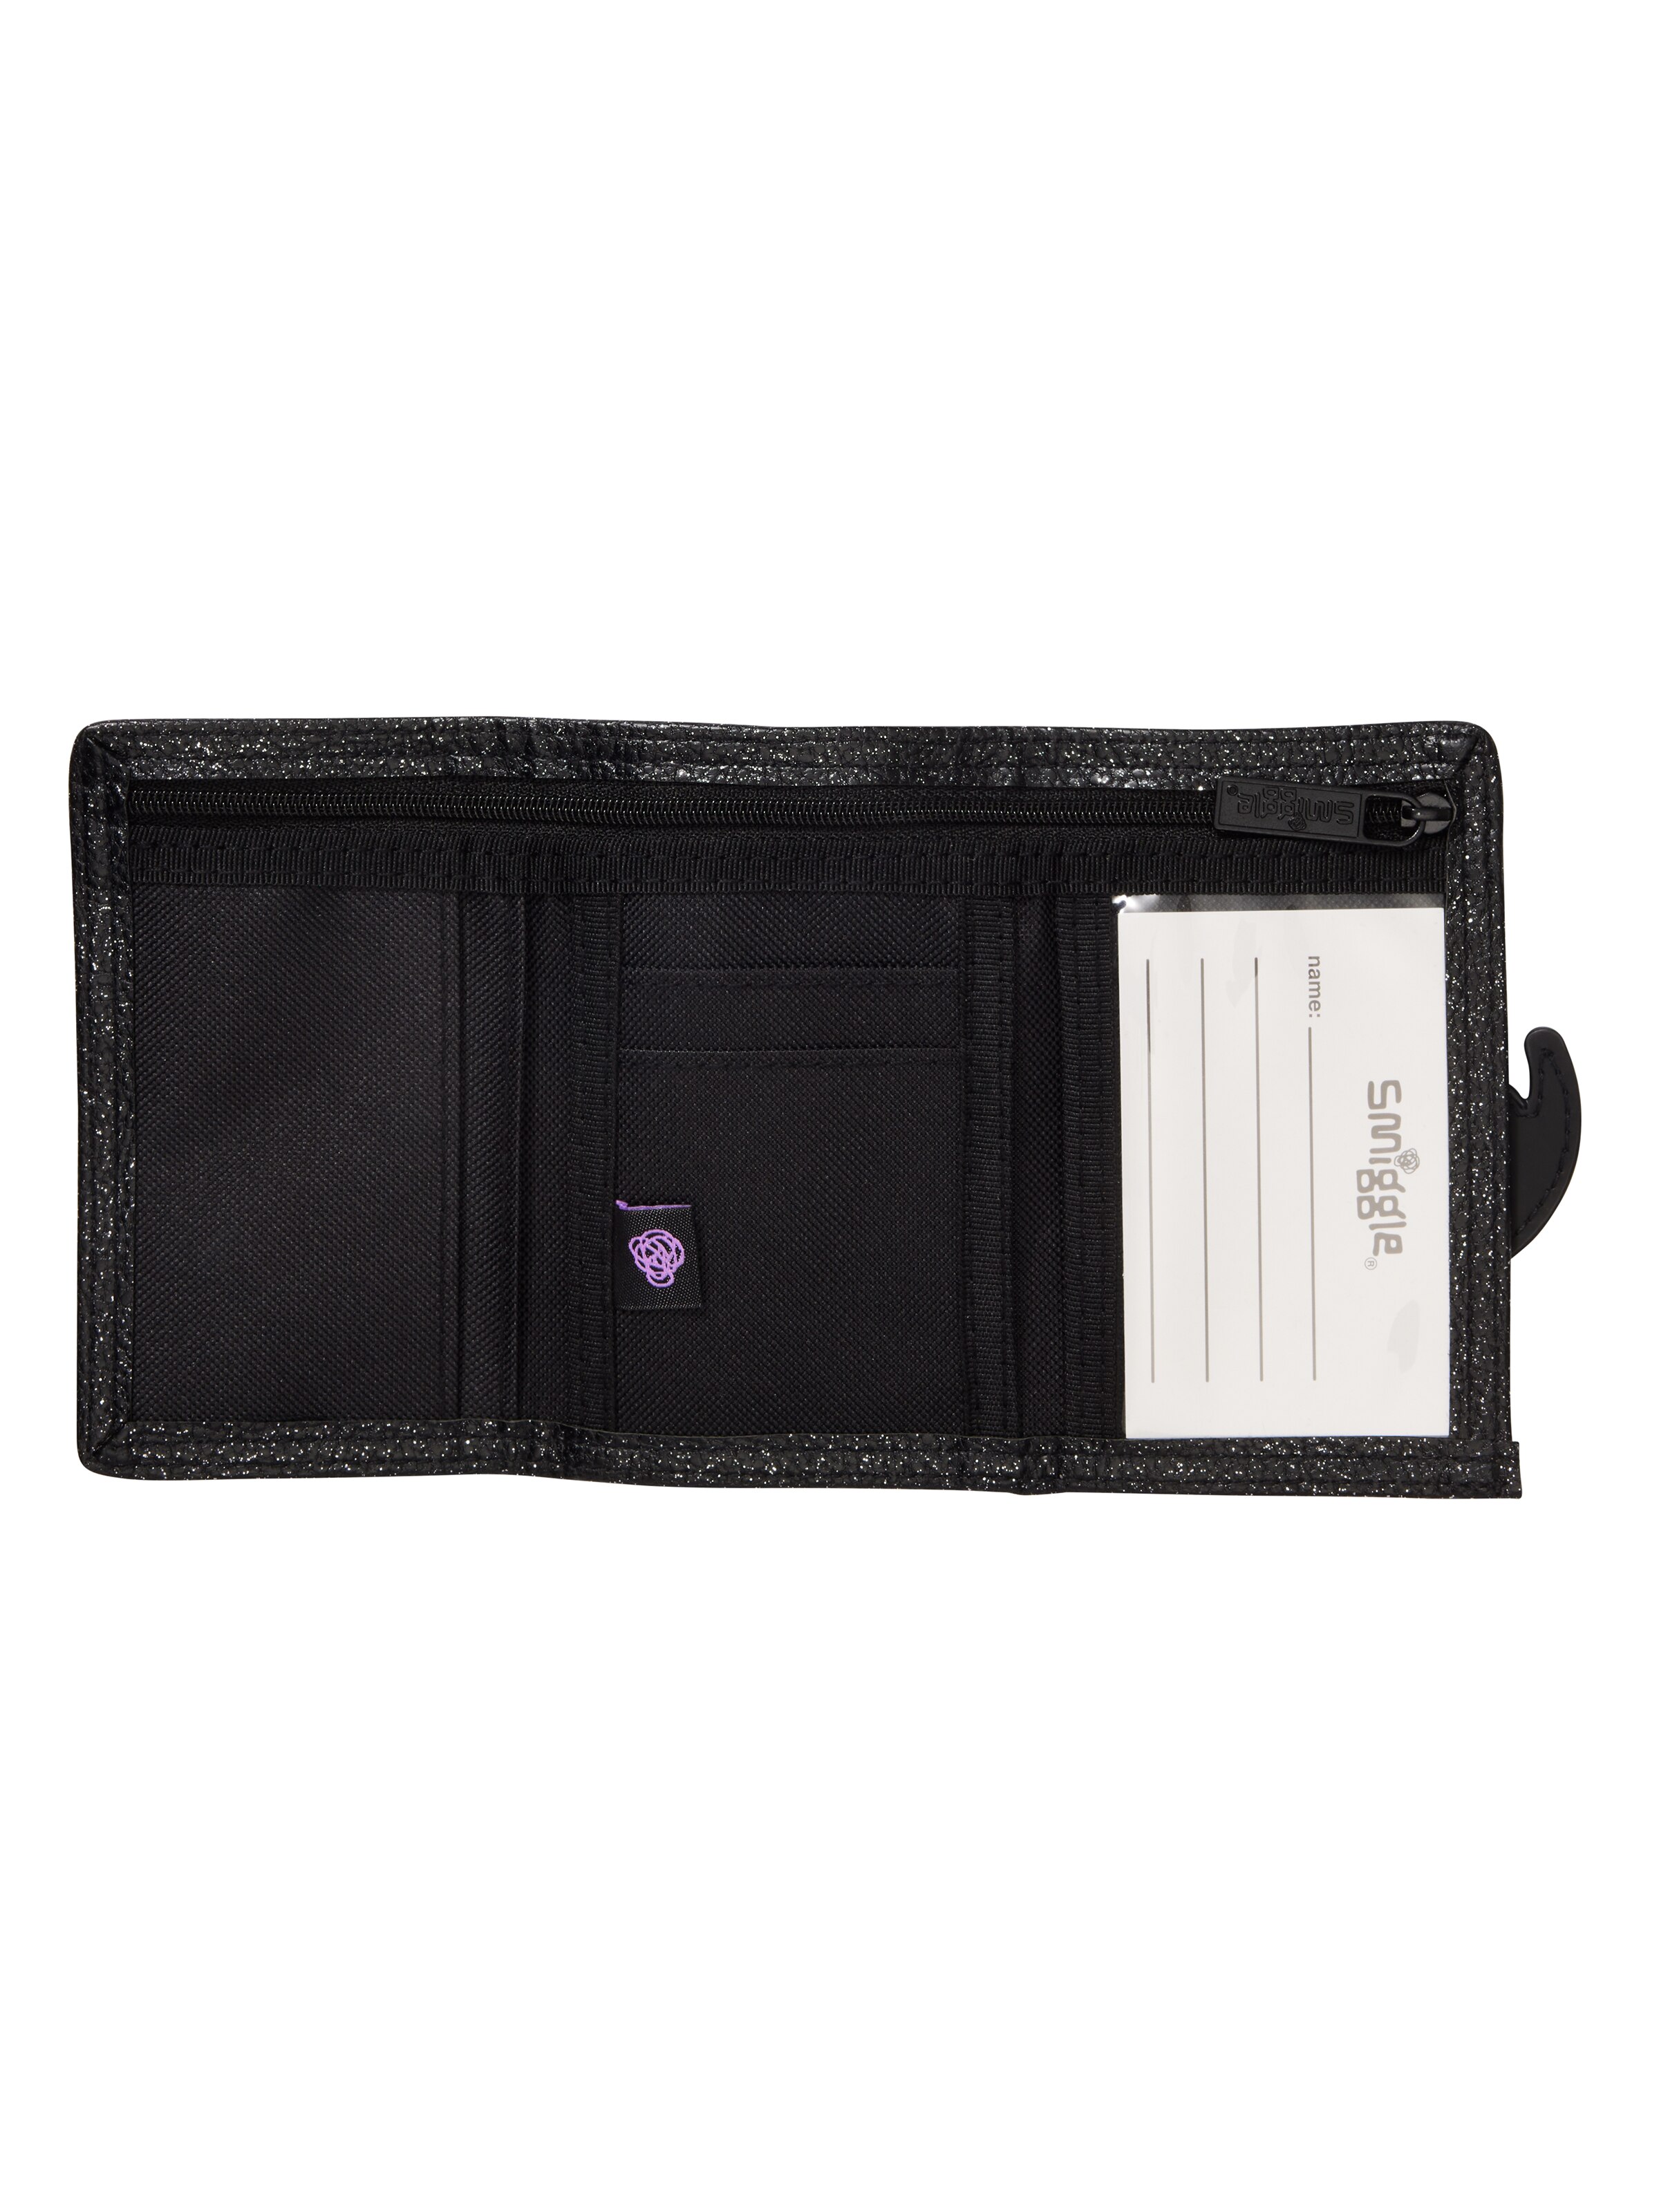 Limitless Character Wallet